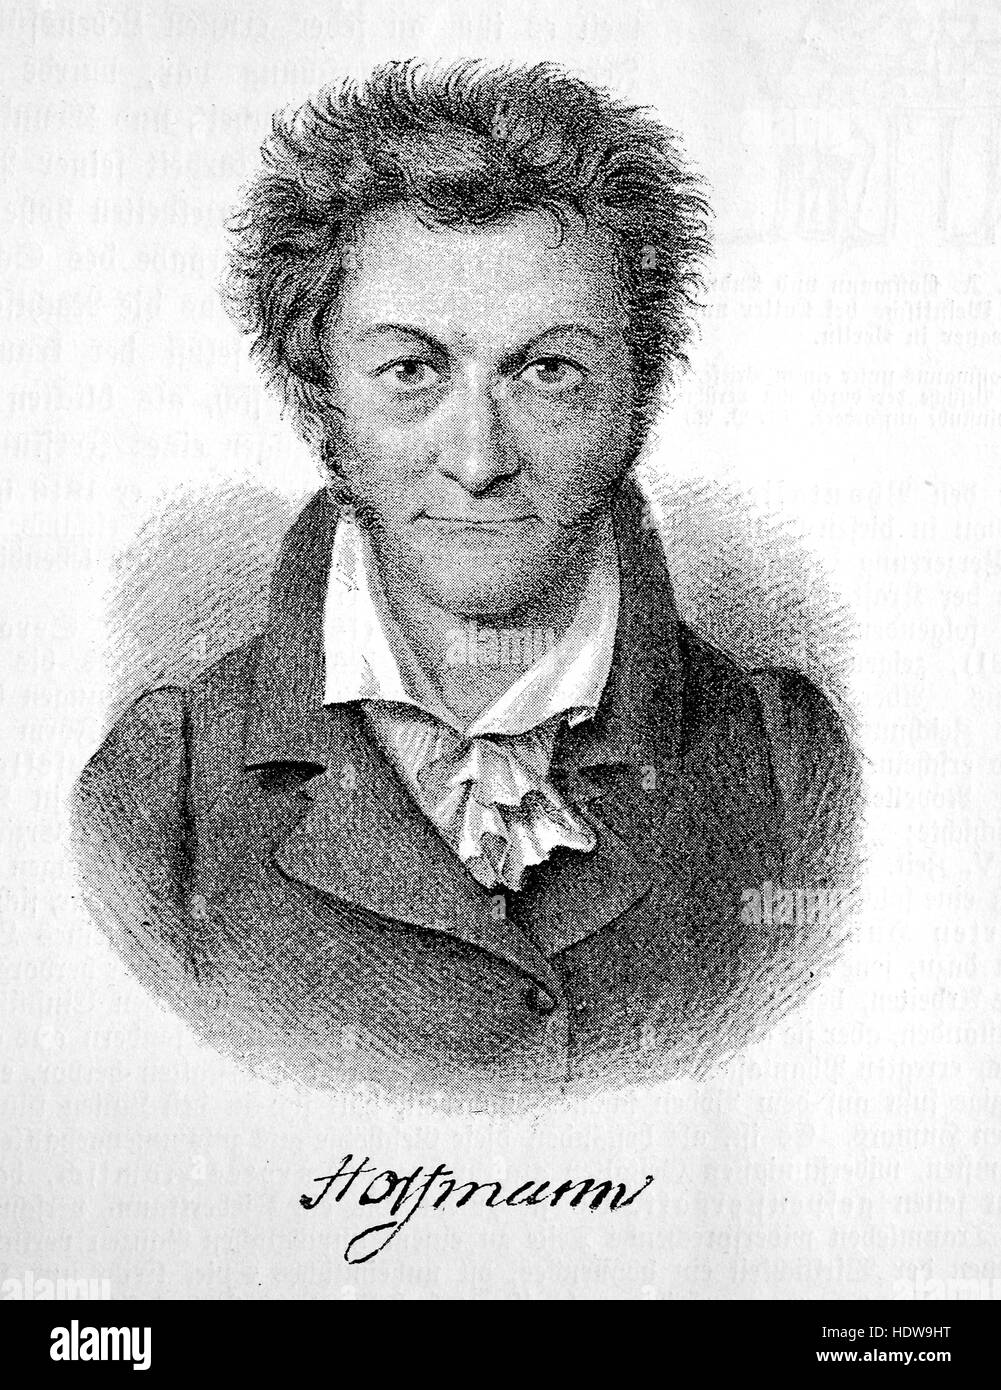 Ernst Theodor Amadeus Hoffmann,  E. T. A. Hoffmann, born Ernst Theodor Wilhelm Hoffmann, 1776-1822, Prussian Romantic author of fantasy and horror, a jurist, composer, music critic, draftsman and caricaturist, woodcut from the year 1880 Stock Photo